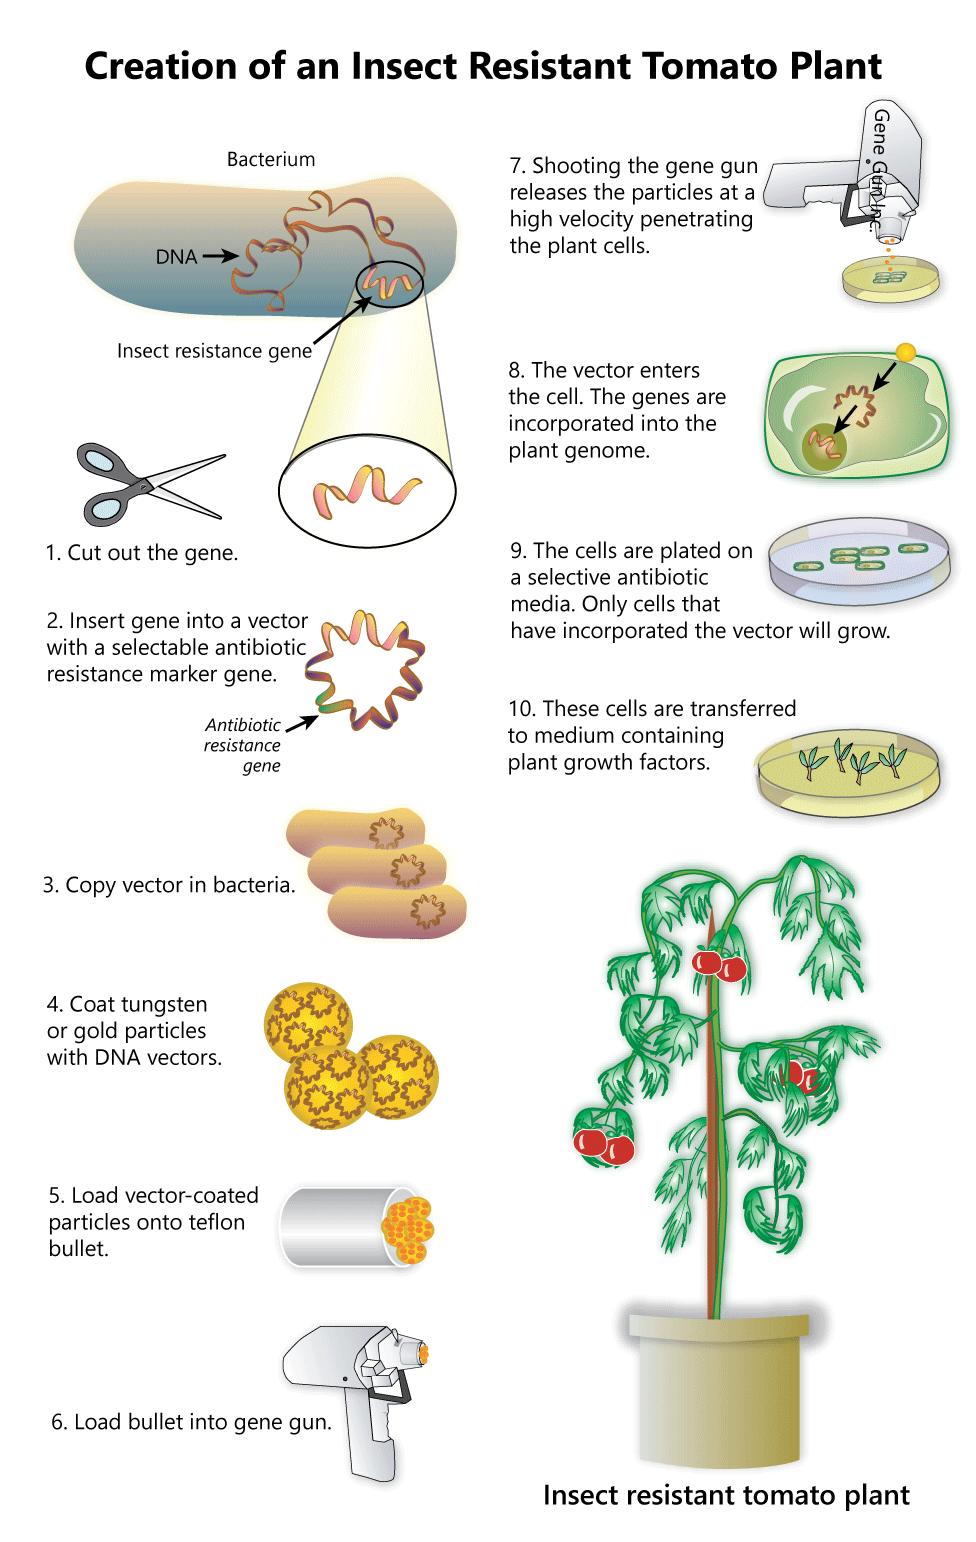 Transgenic Techniques Certain genetically modified organisms could also be